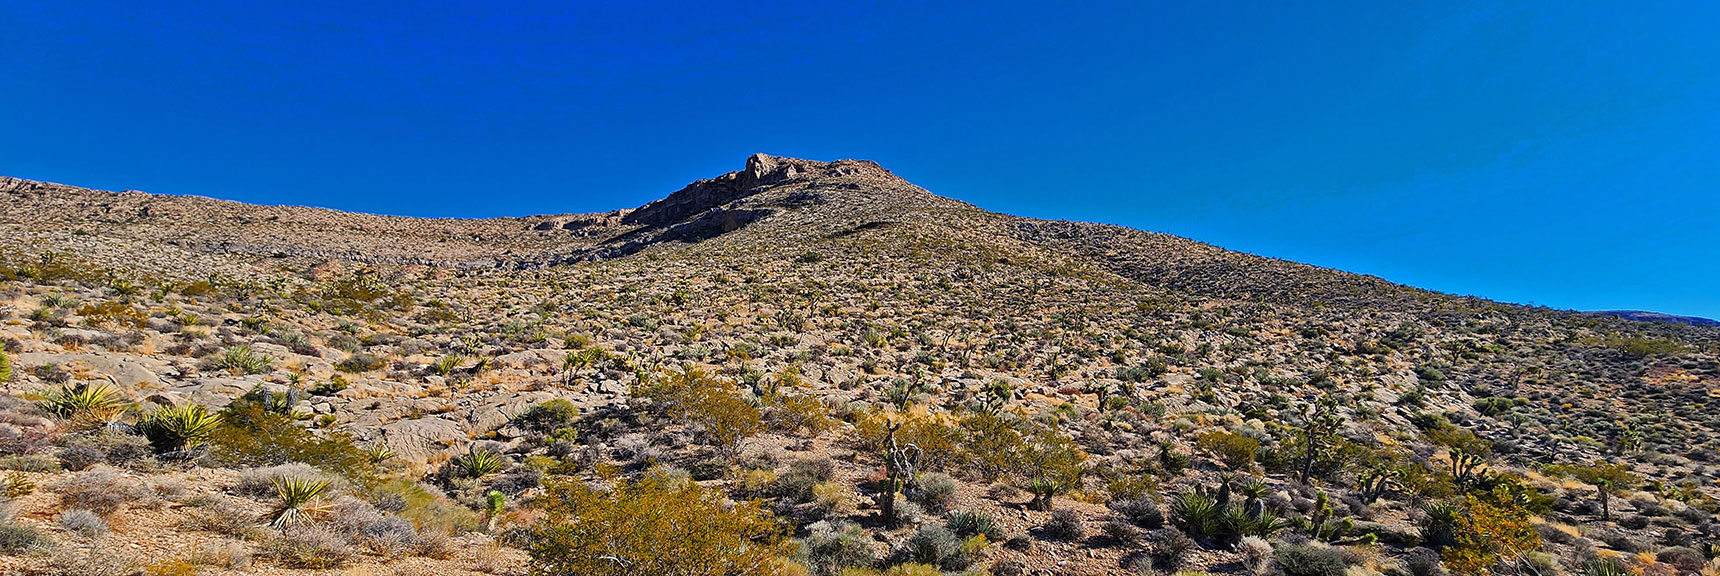 Another Potential Summit Approach on South Side of This Shallow Canyon. | Landmark Bluff Circuit | Lovell Canyon, Nevada